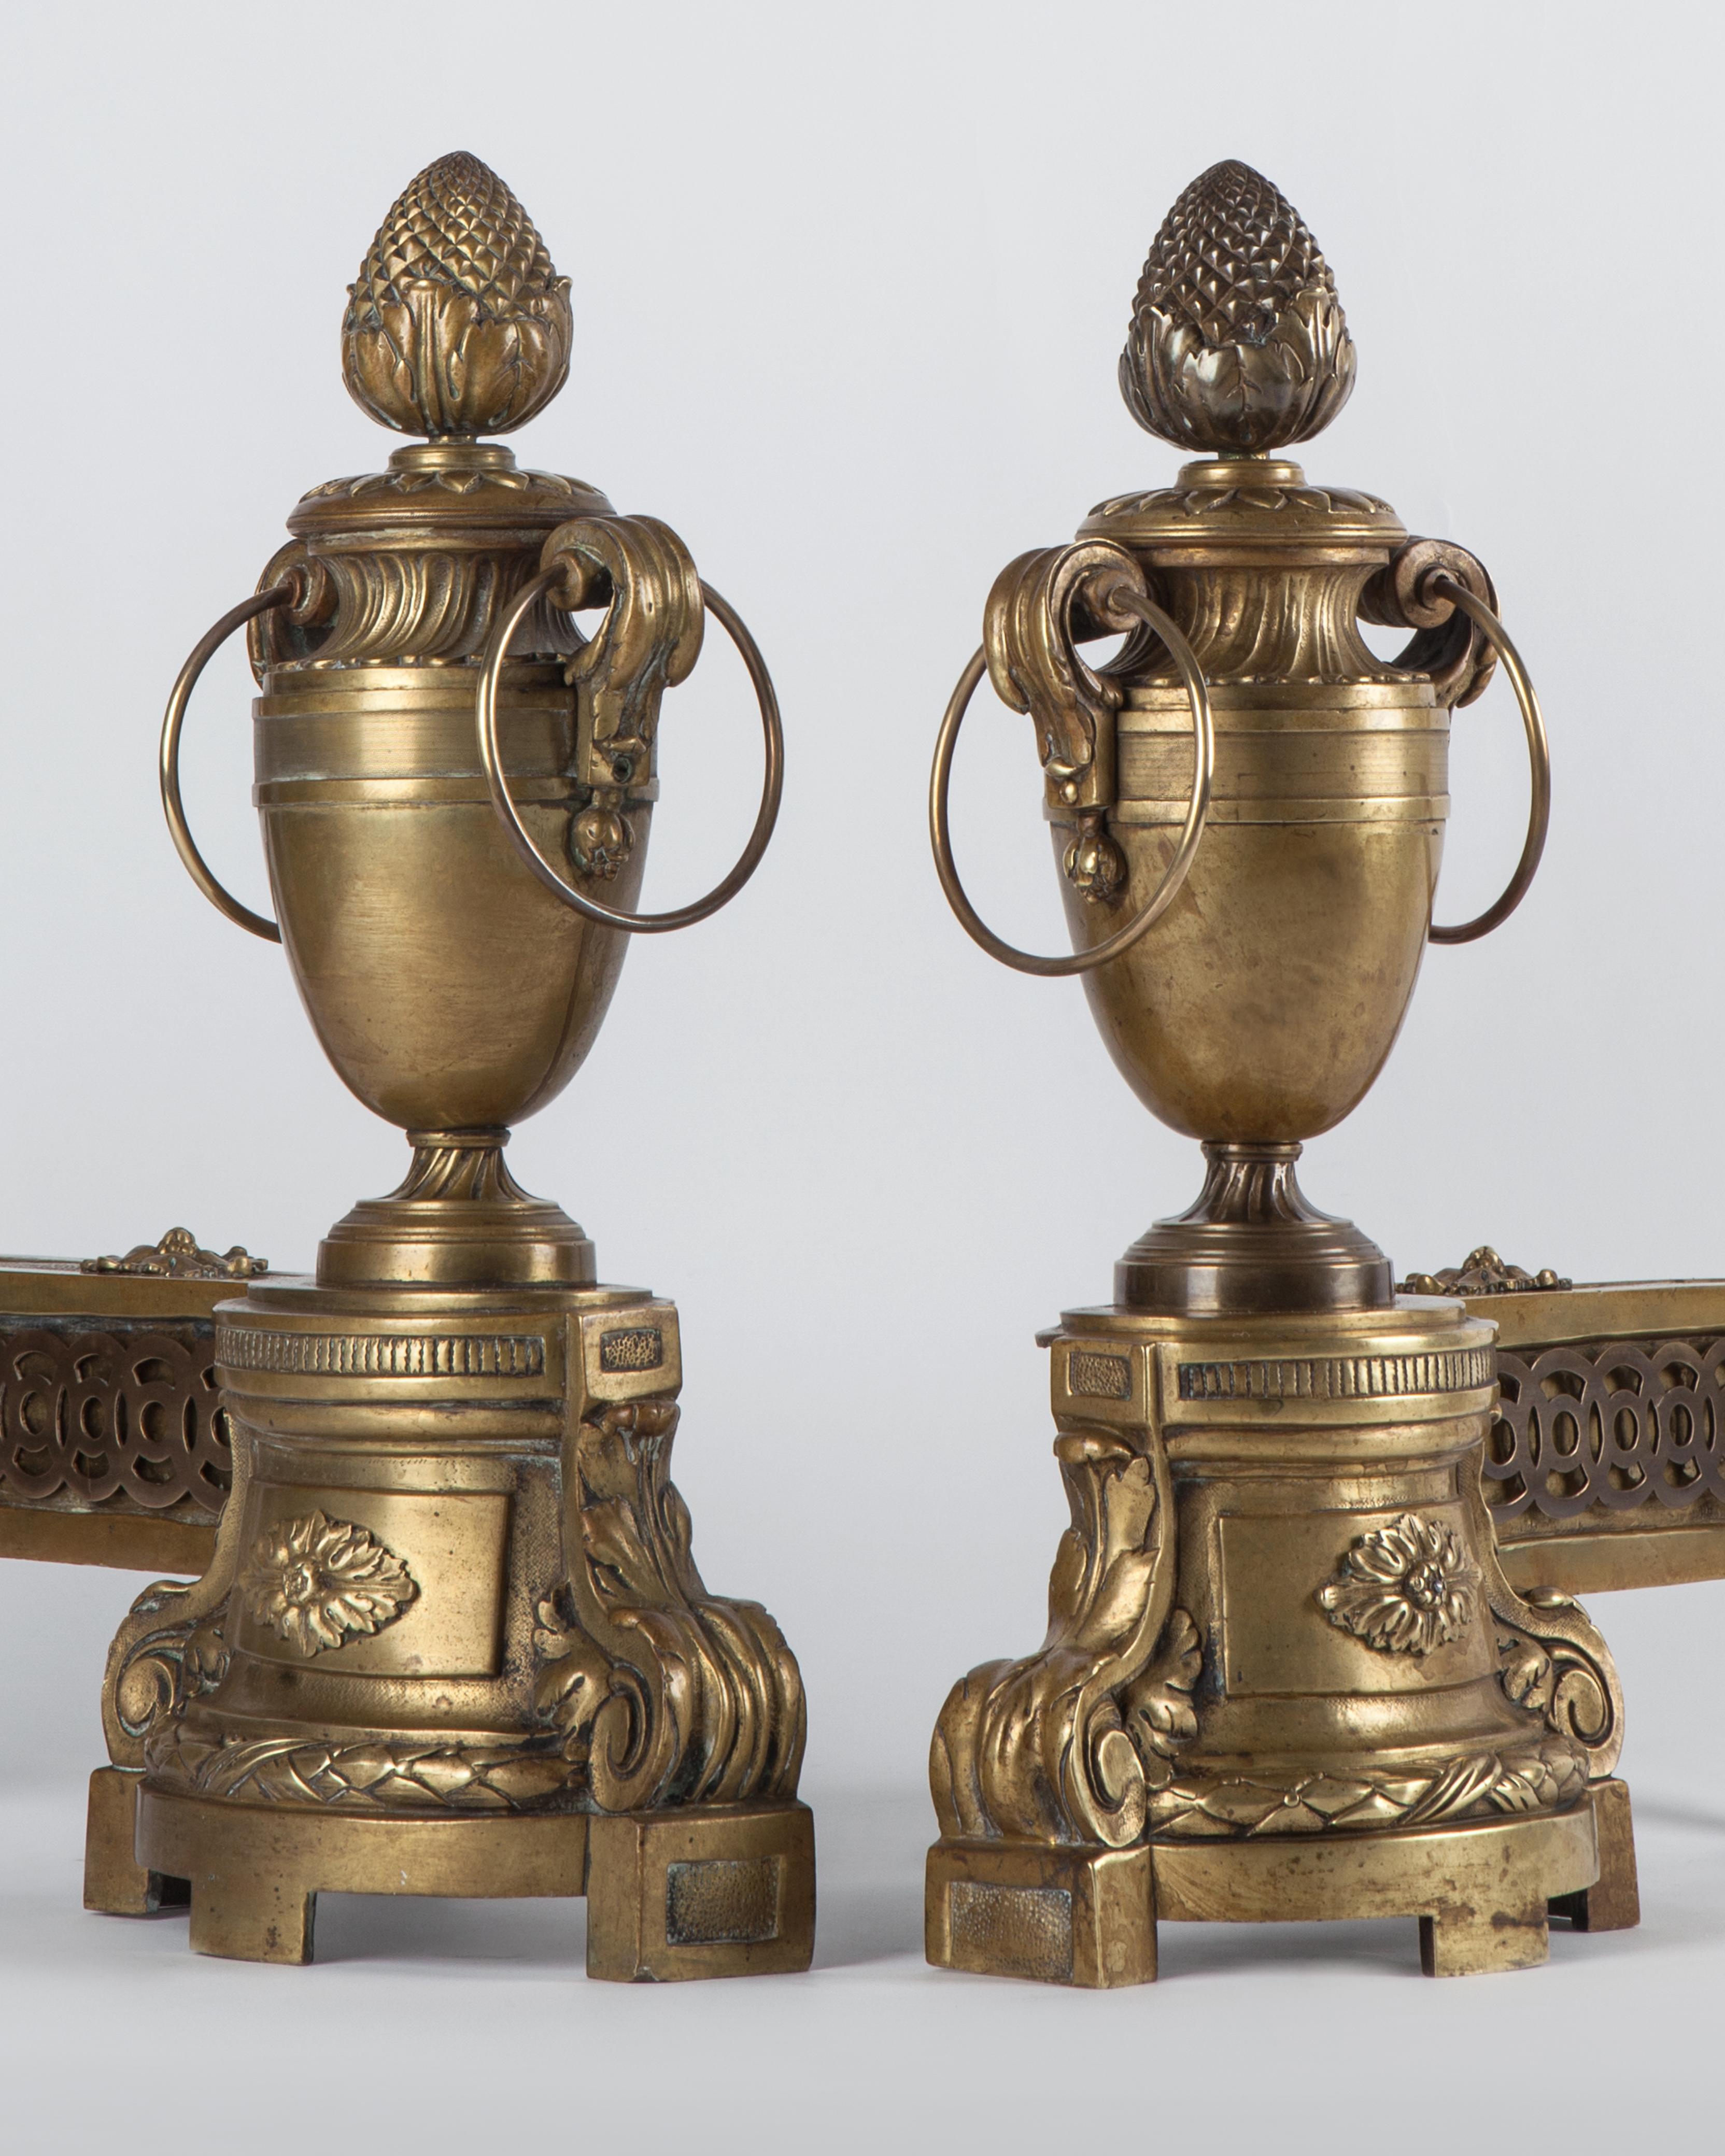 AFP0515
A pair of antique French urn form chenets having finely chased neoclassical details in the bodies with pinecone and flame finials. In their original age-darkened brass finish. Circa 1860.

Dimensions:
Overall: 17-1/2